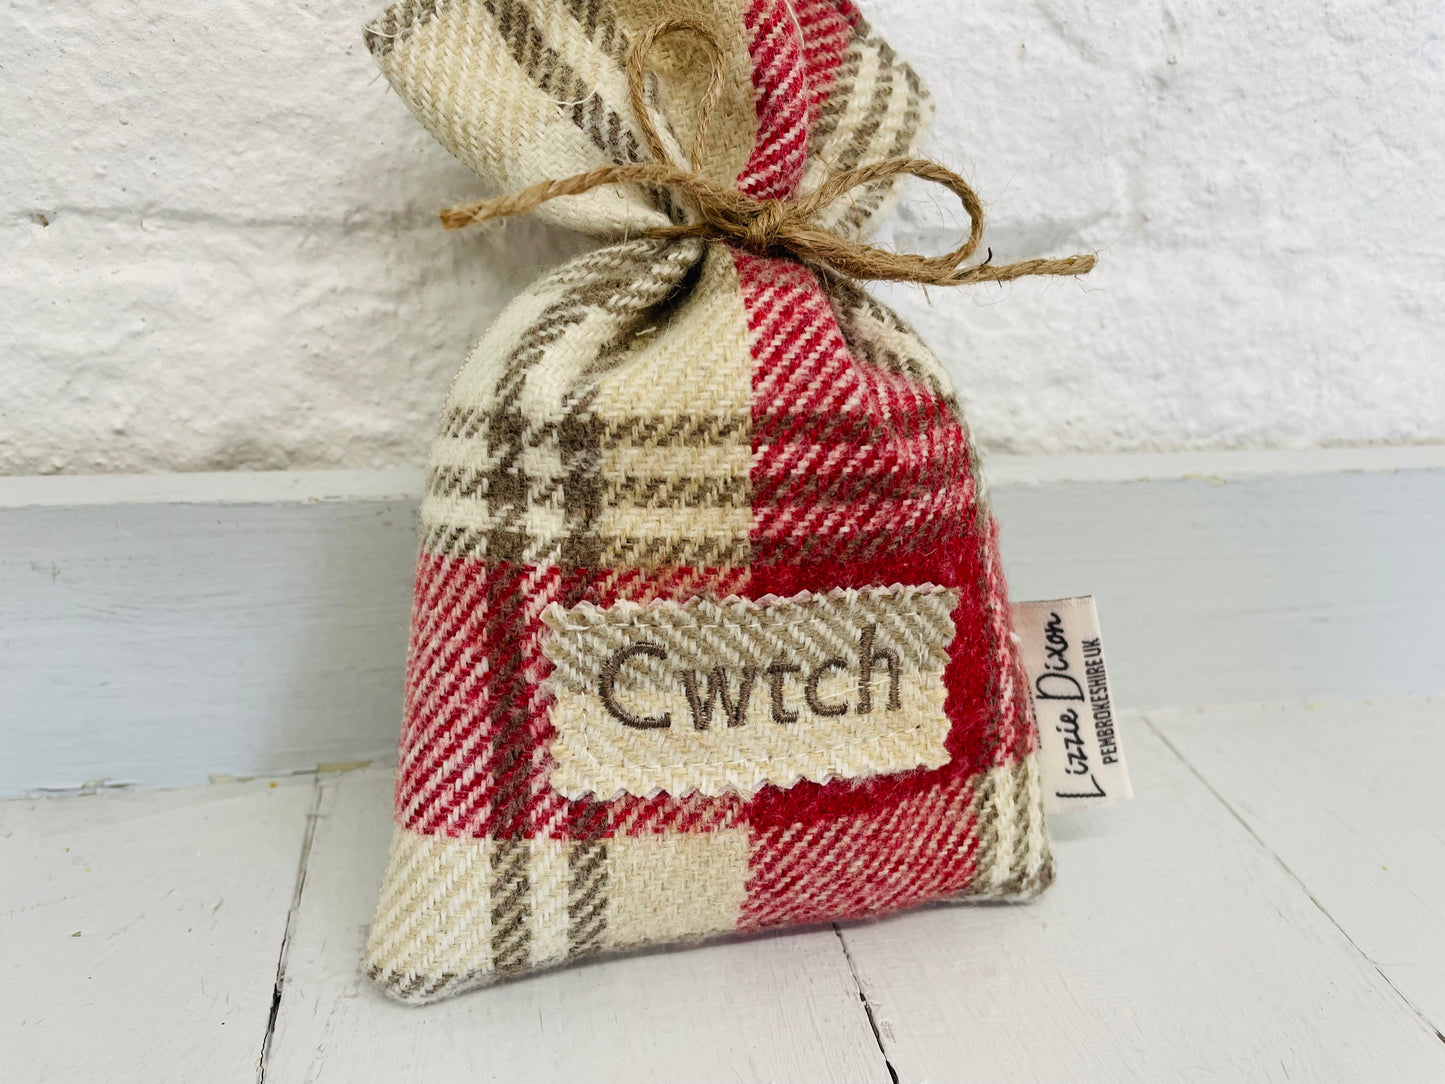 Cwtch Lavender Bag wool touch fabric.